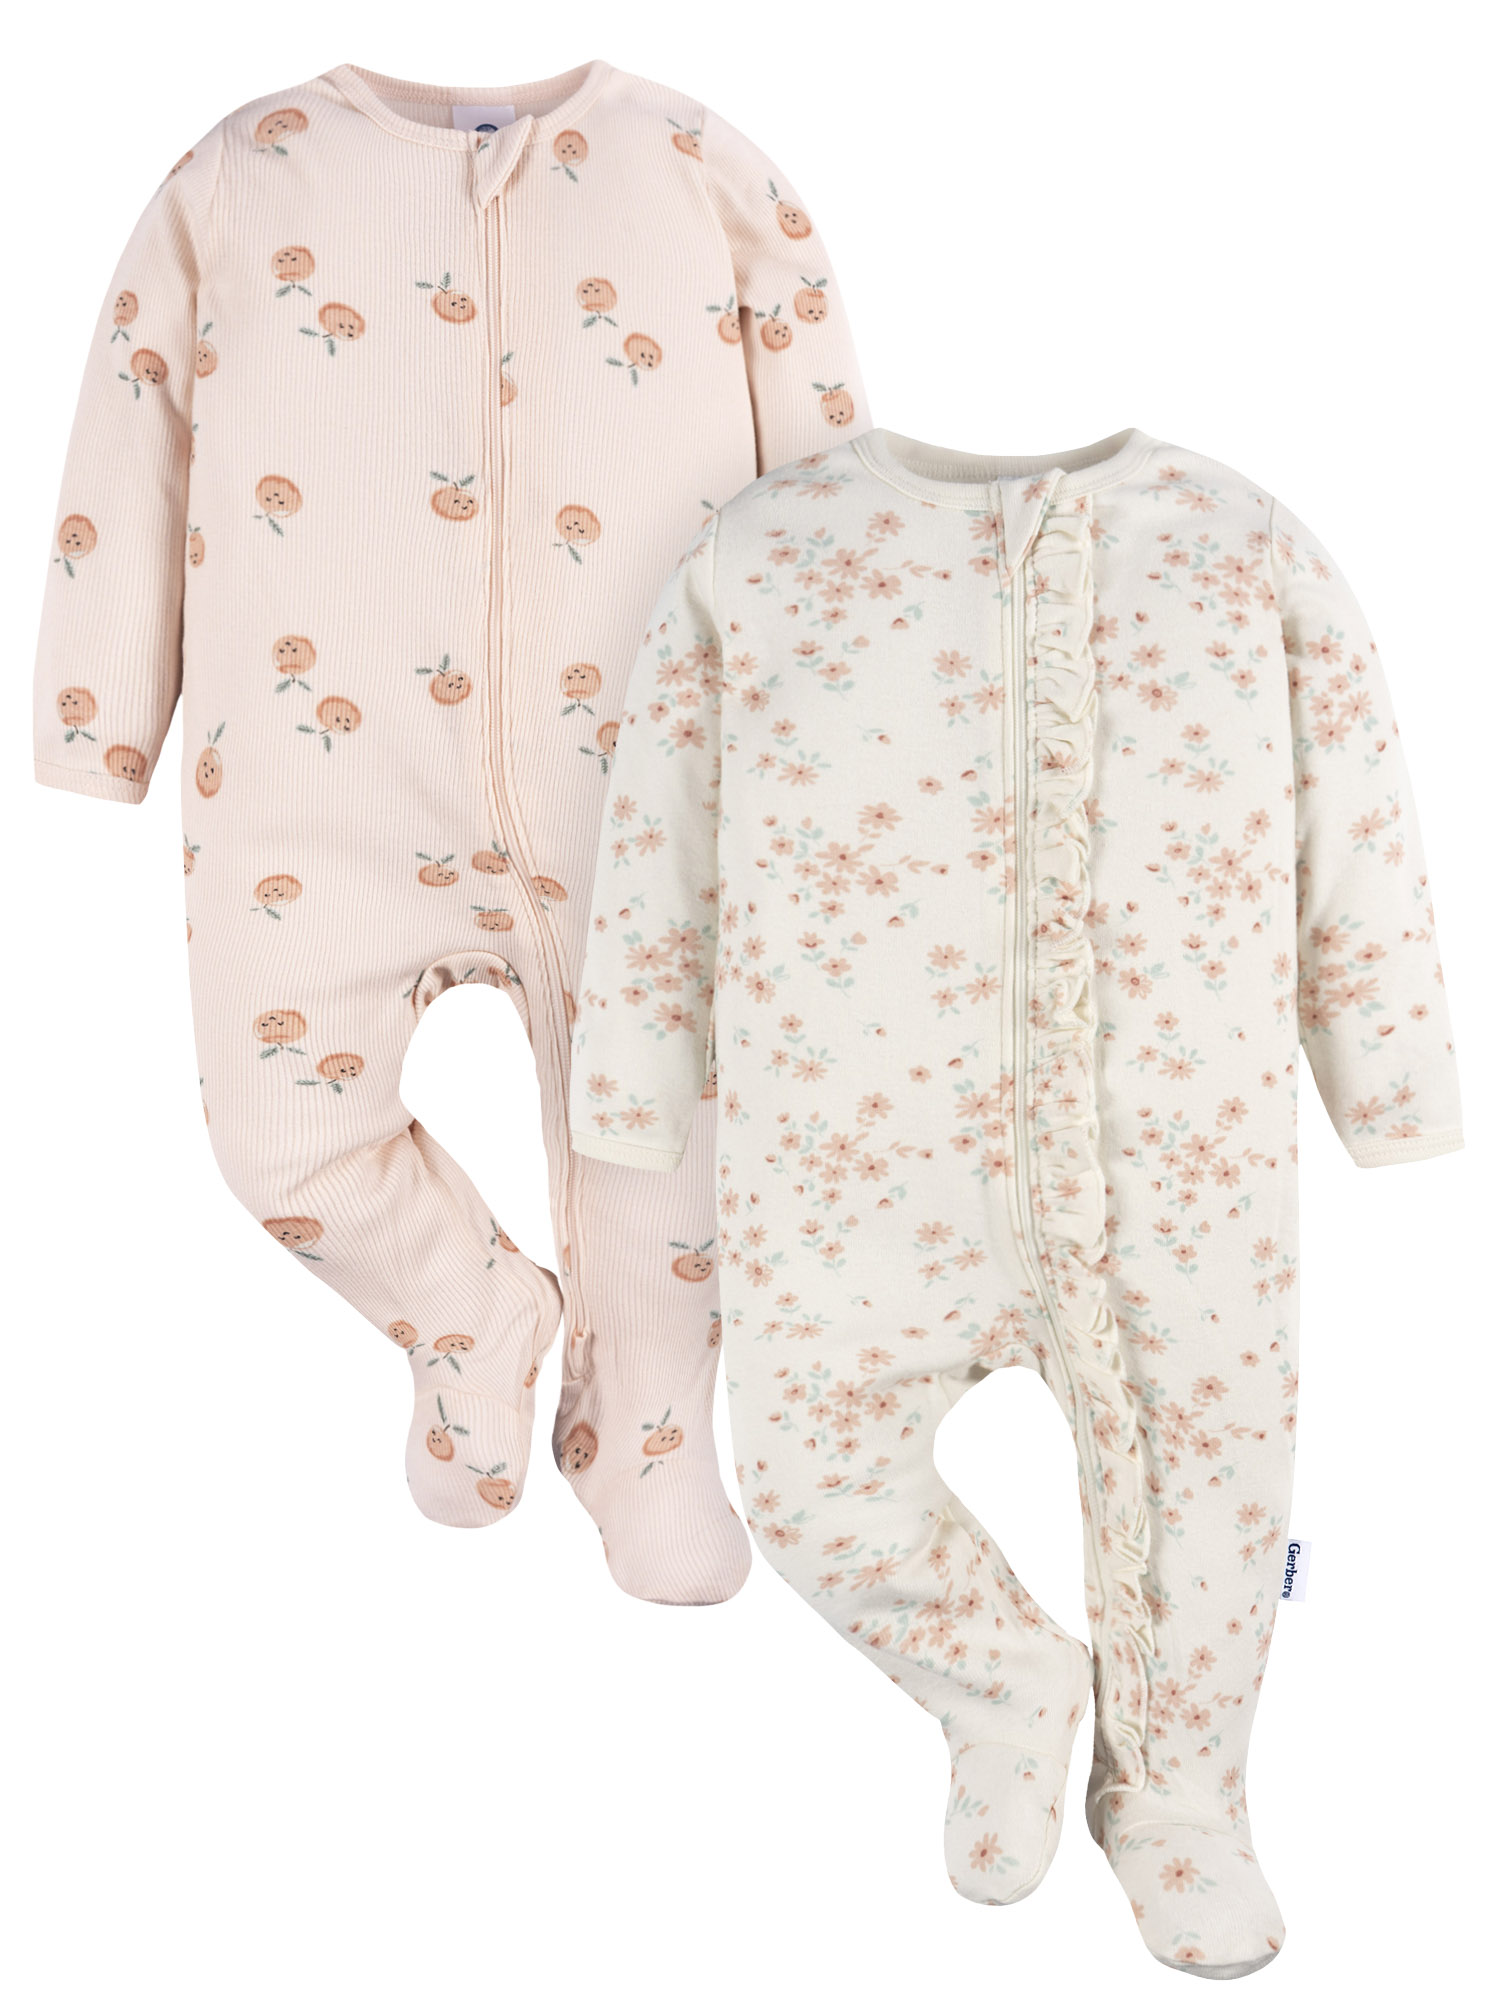 Gerber Baby Girl Sleep´N Play Footed Cotton Pajamas, 2-Pack, Sizes Newborn - 3/6 Months - image 1 of 11